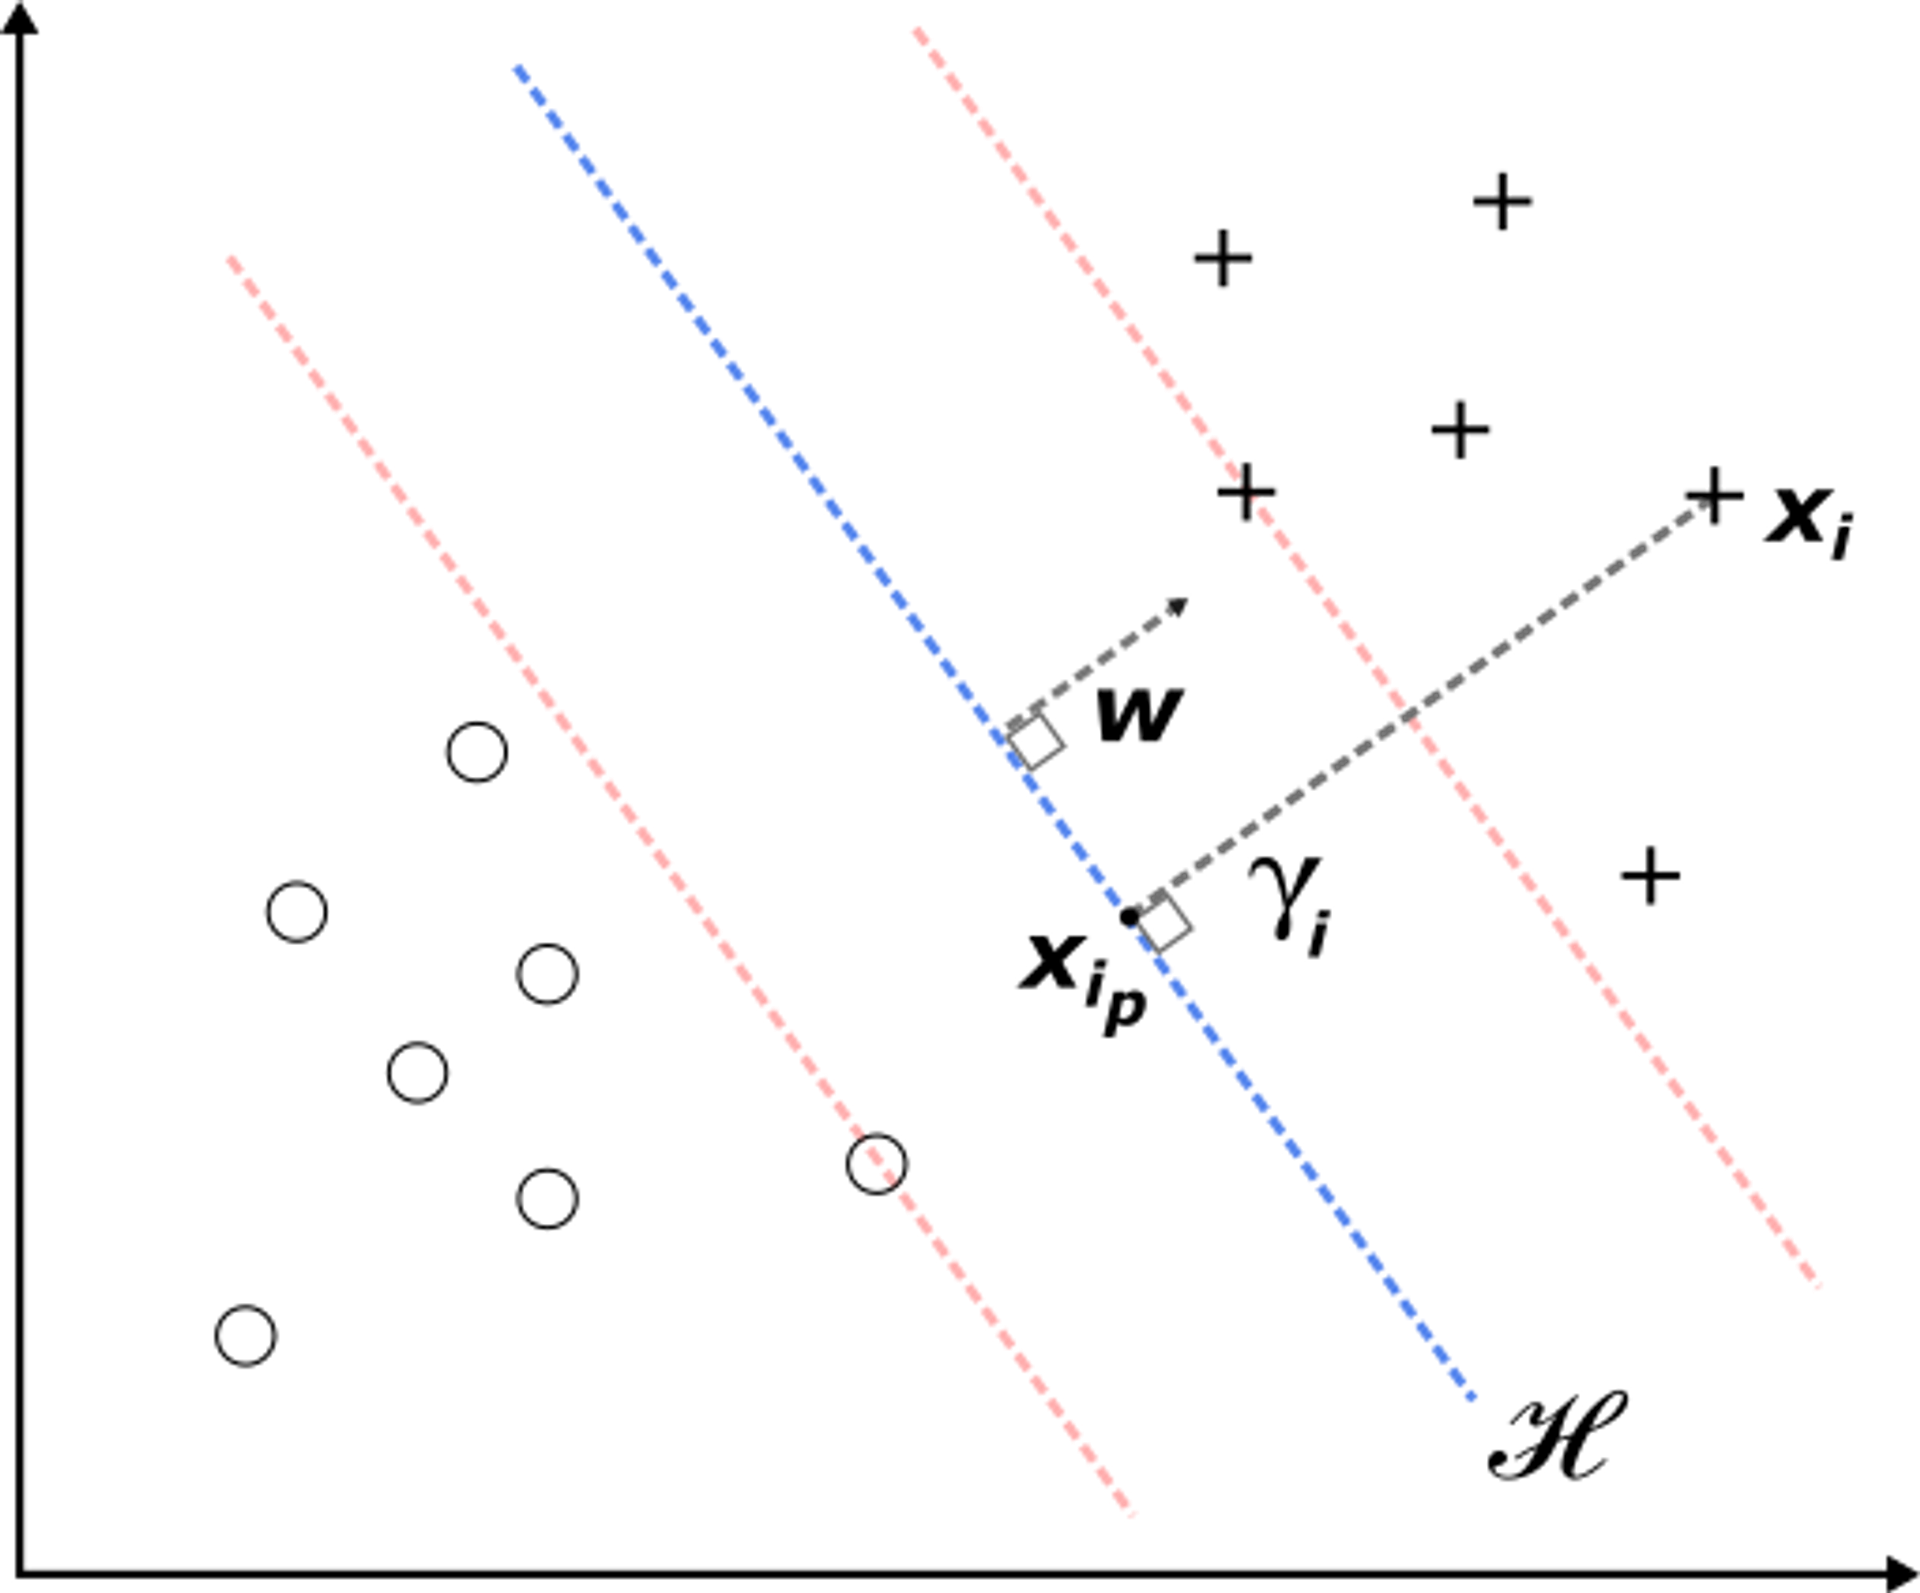 Two linearly separable classes and an optimal separating hyperplane.